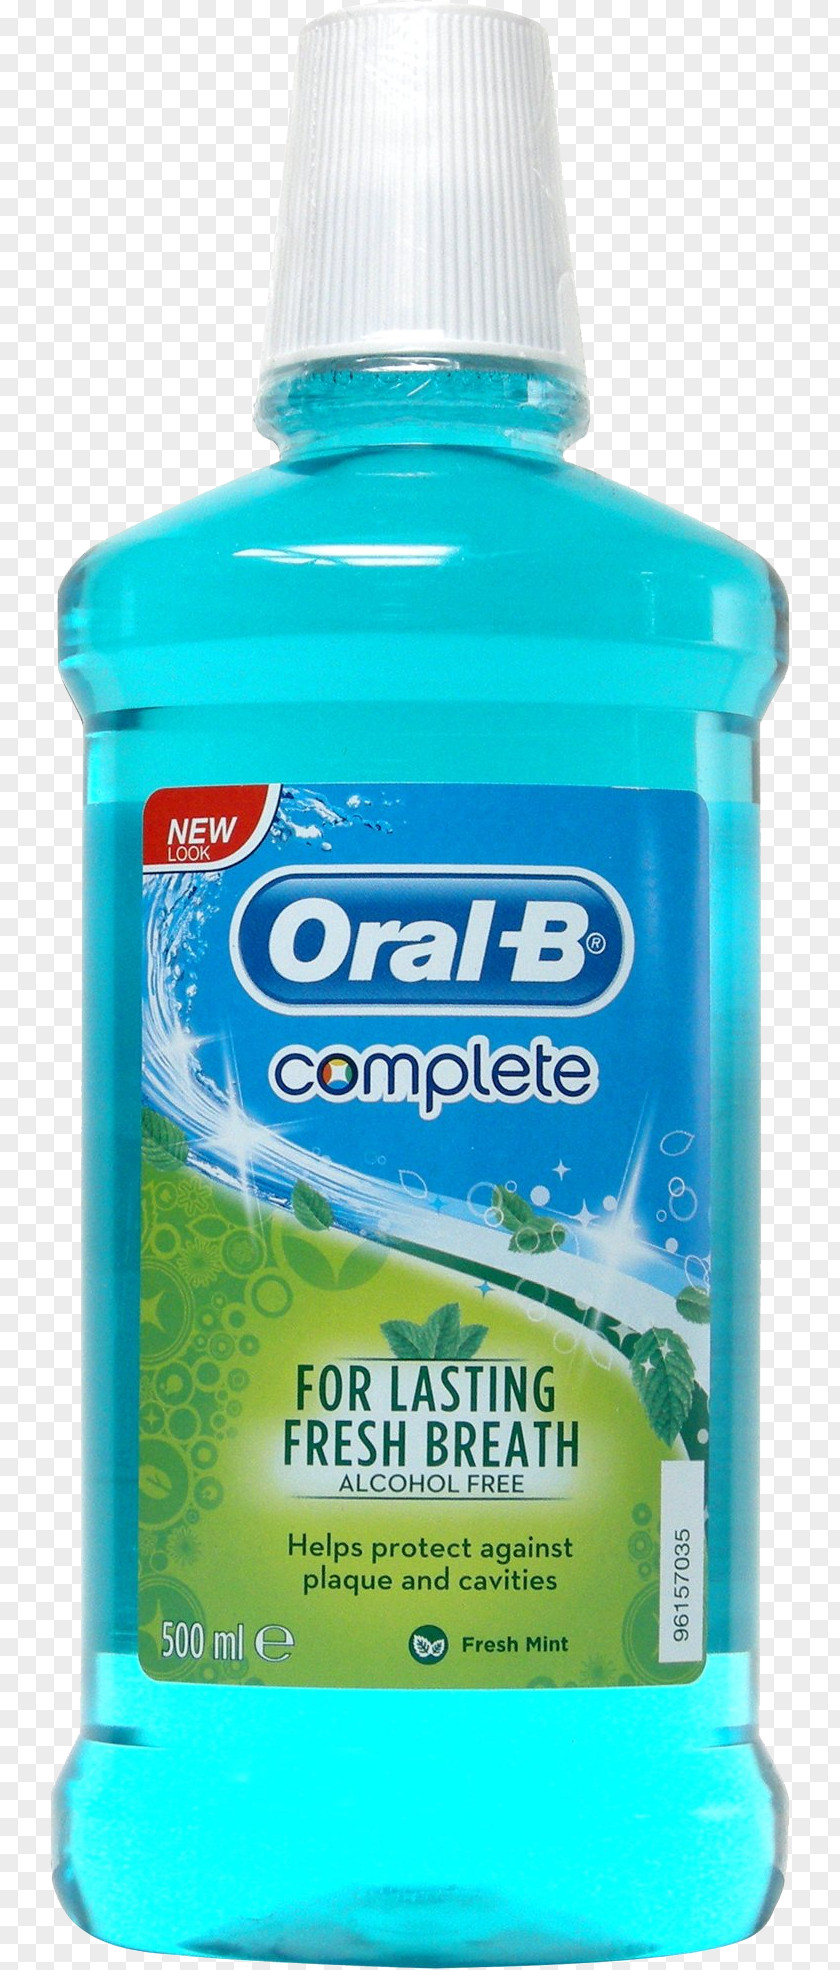 Toothpaste Mouthwash Oral-B Human Mouth Listerine PNG